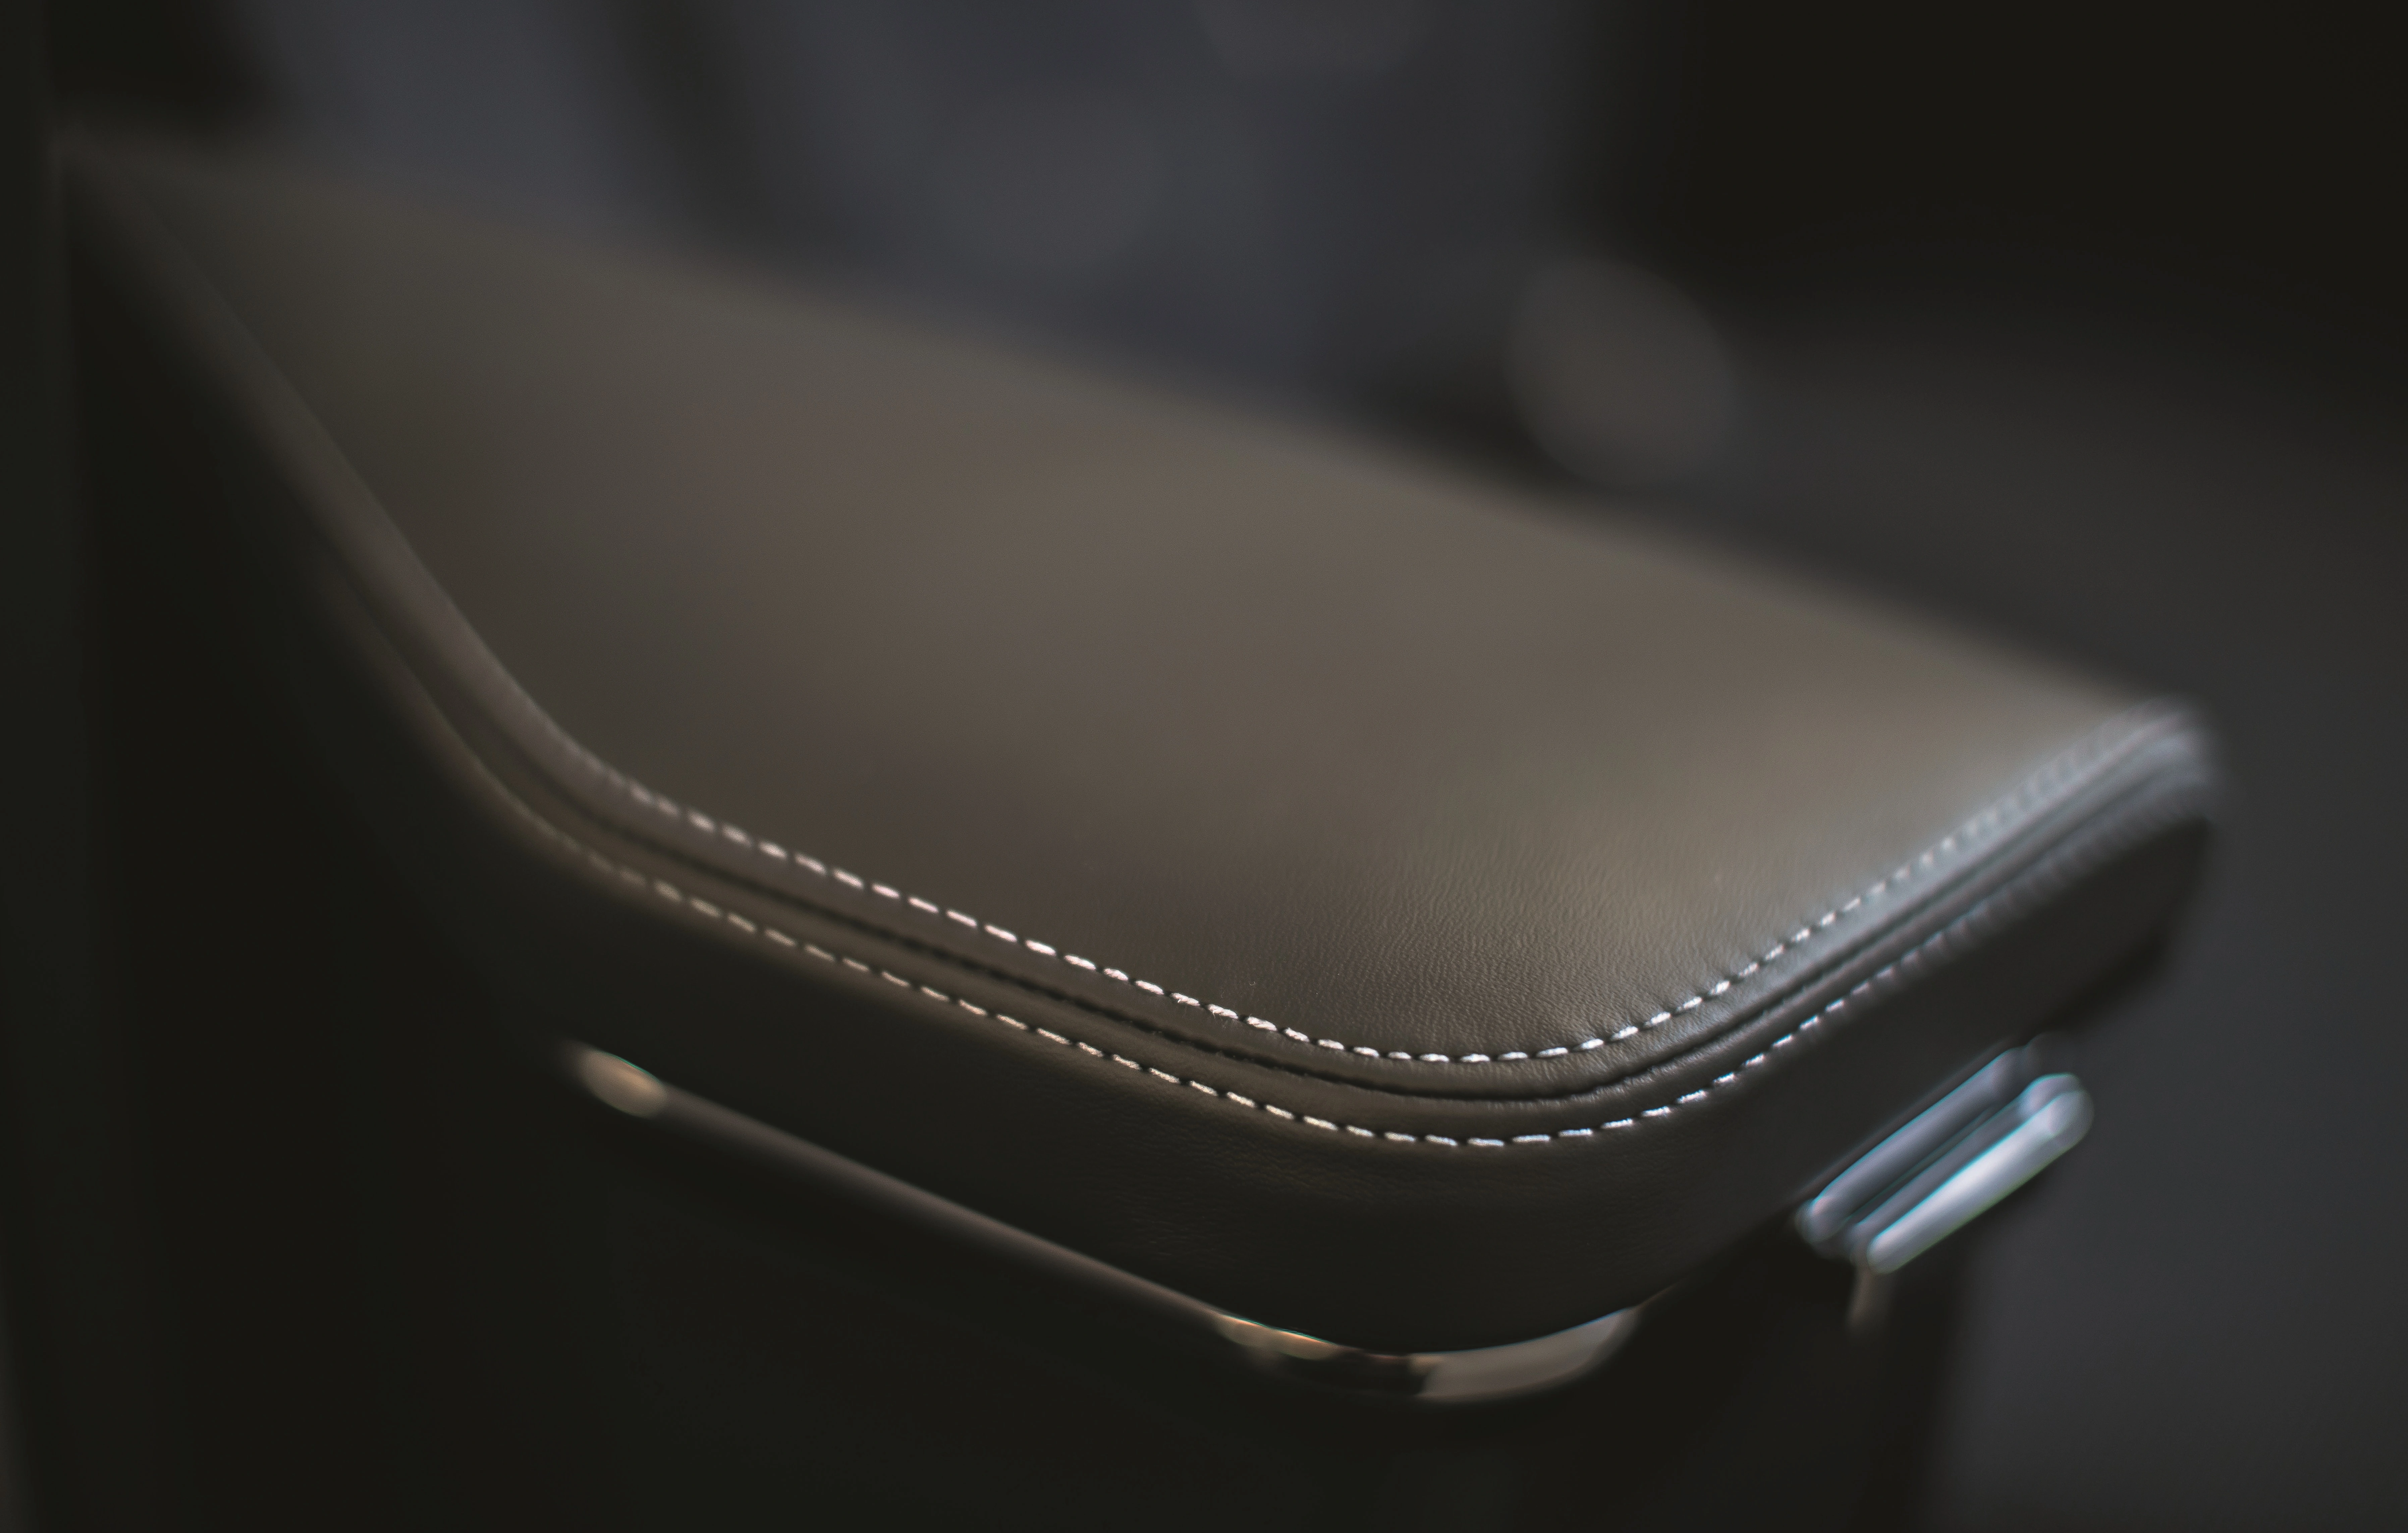 Photograph of the armrest on the BA club suite, which can be moved up and down